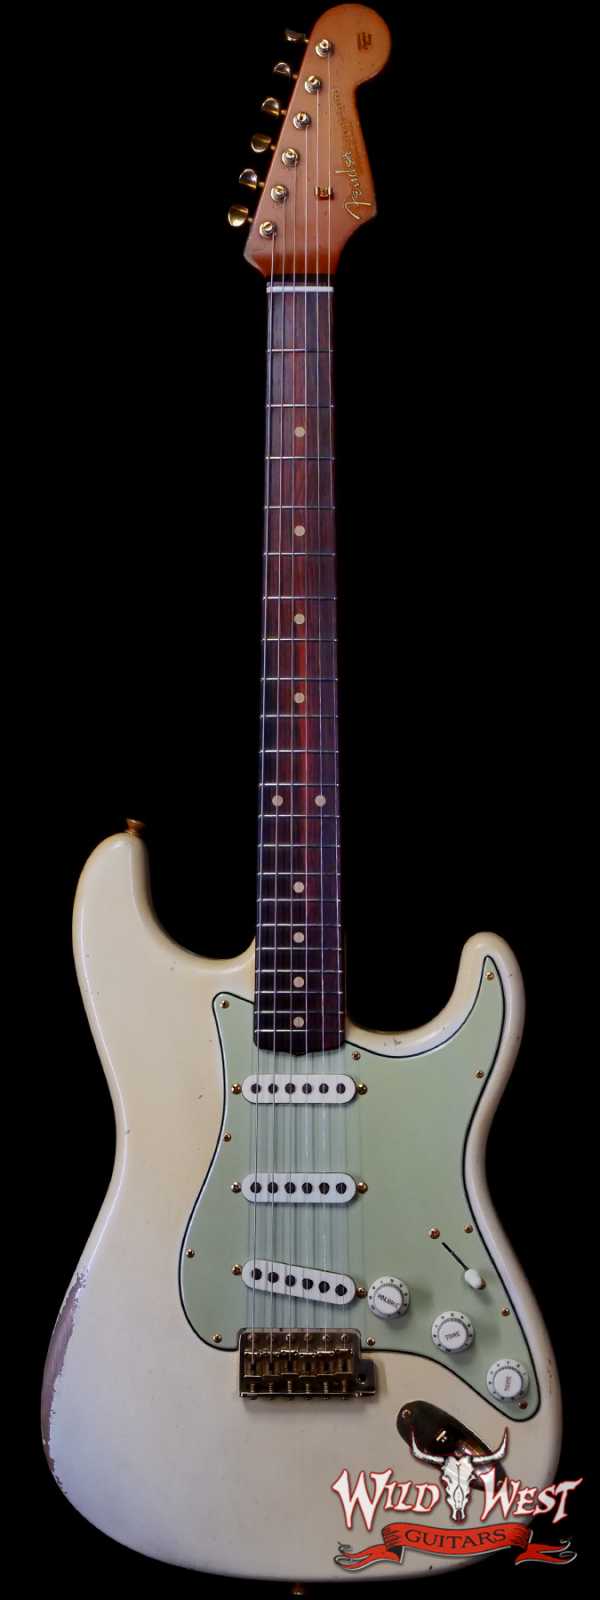 Fender Custom Shop Dale Wilson Masterbuilt 1961 Stratocaster Hand-Wound Pickups Brazilian Rosewood Fingerboard Relic Vintage White 7.35 LBS (US Only / No International Shipping)